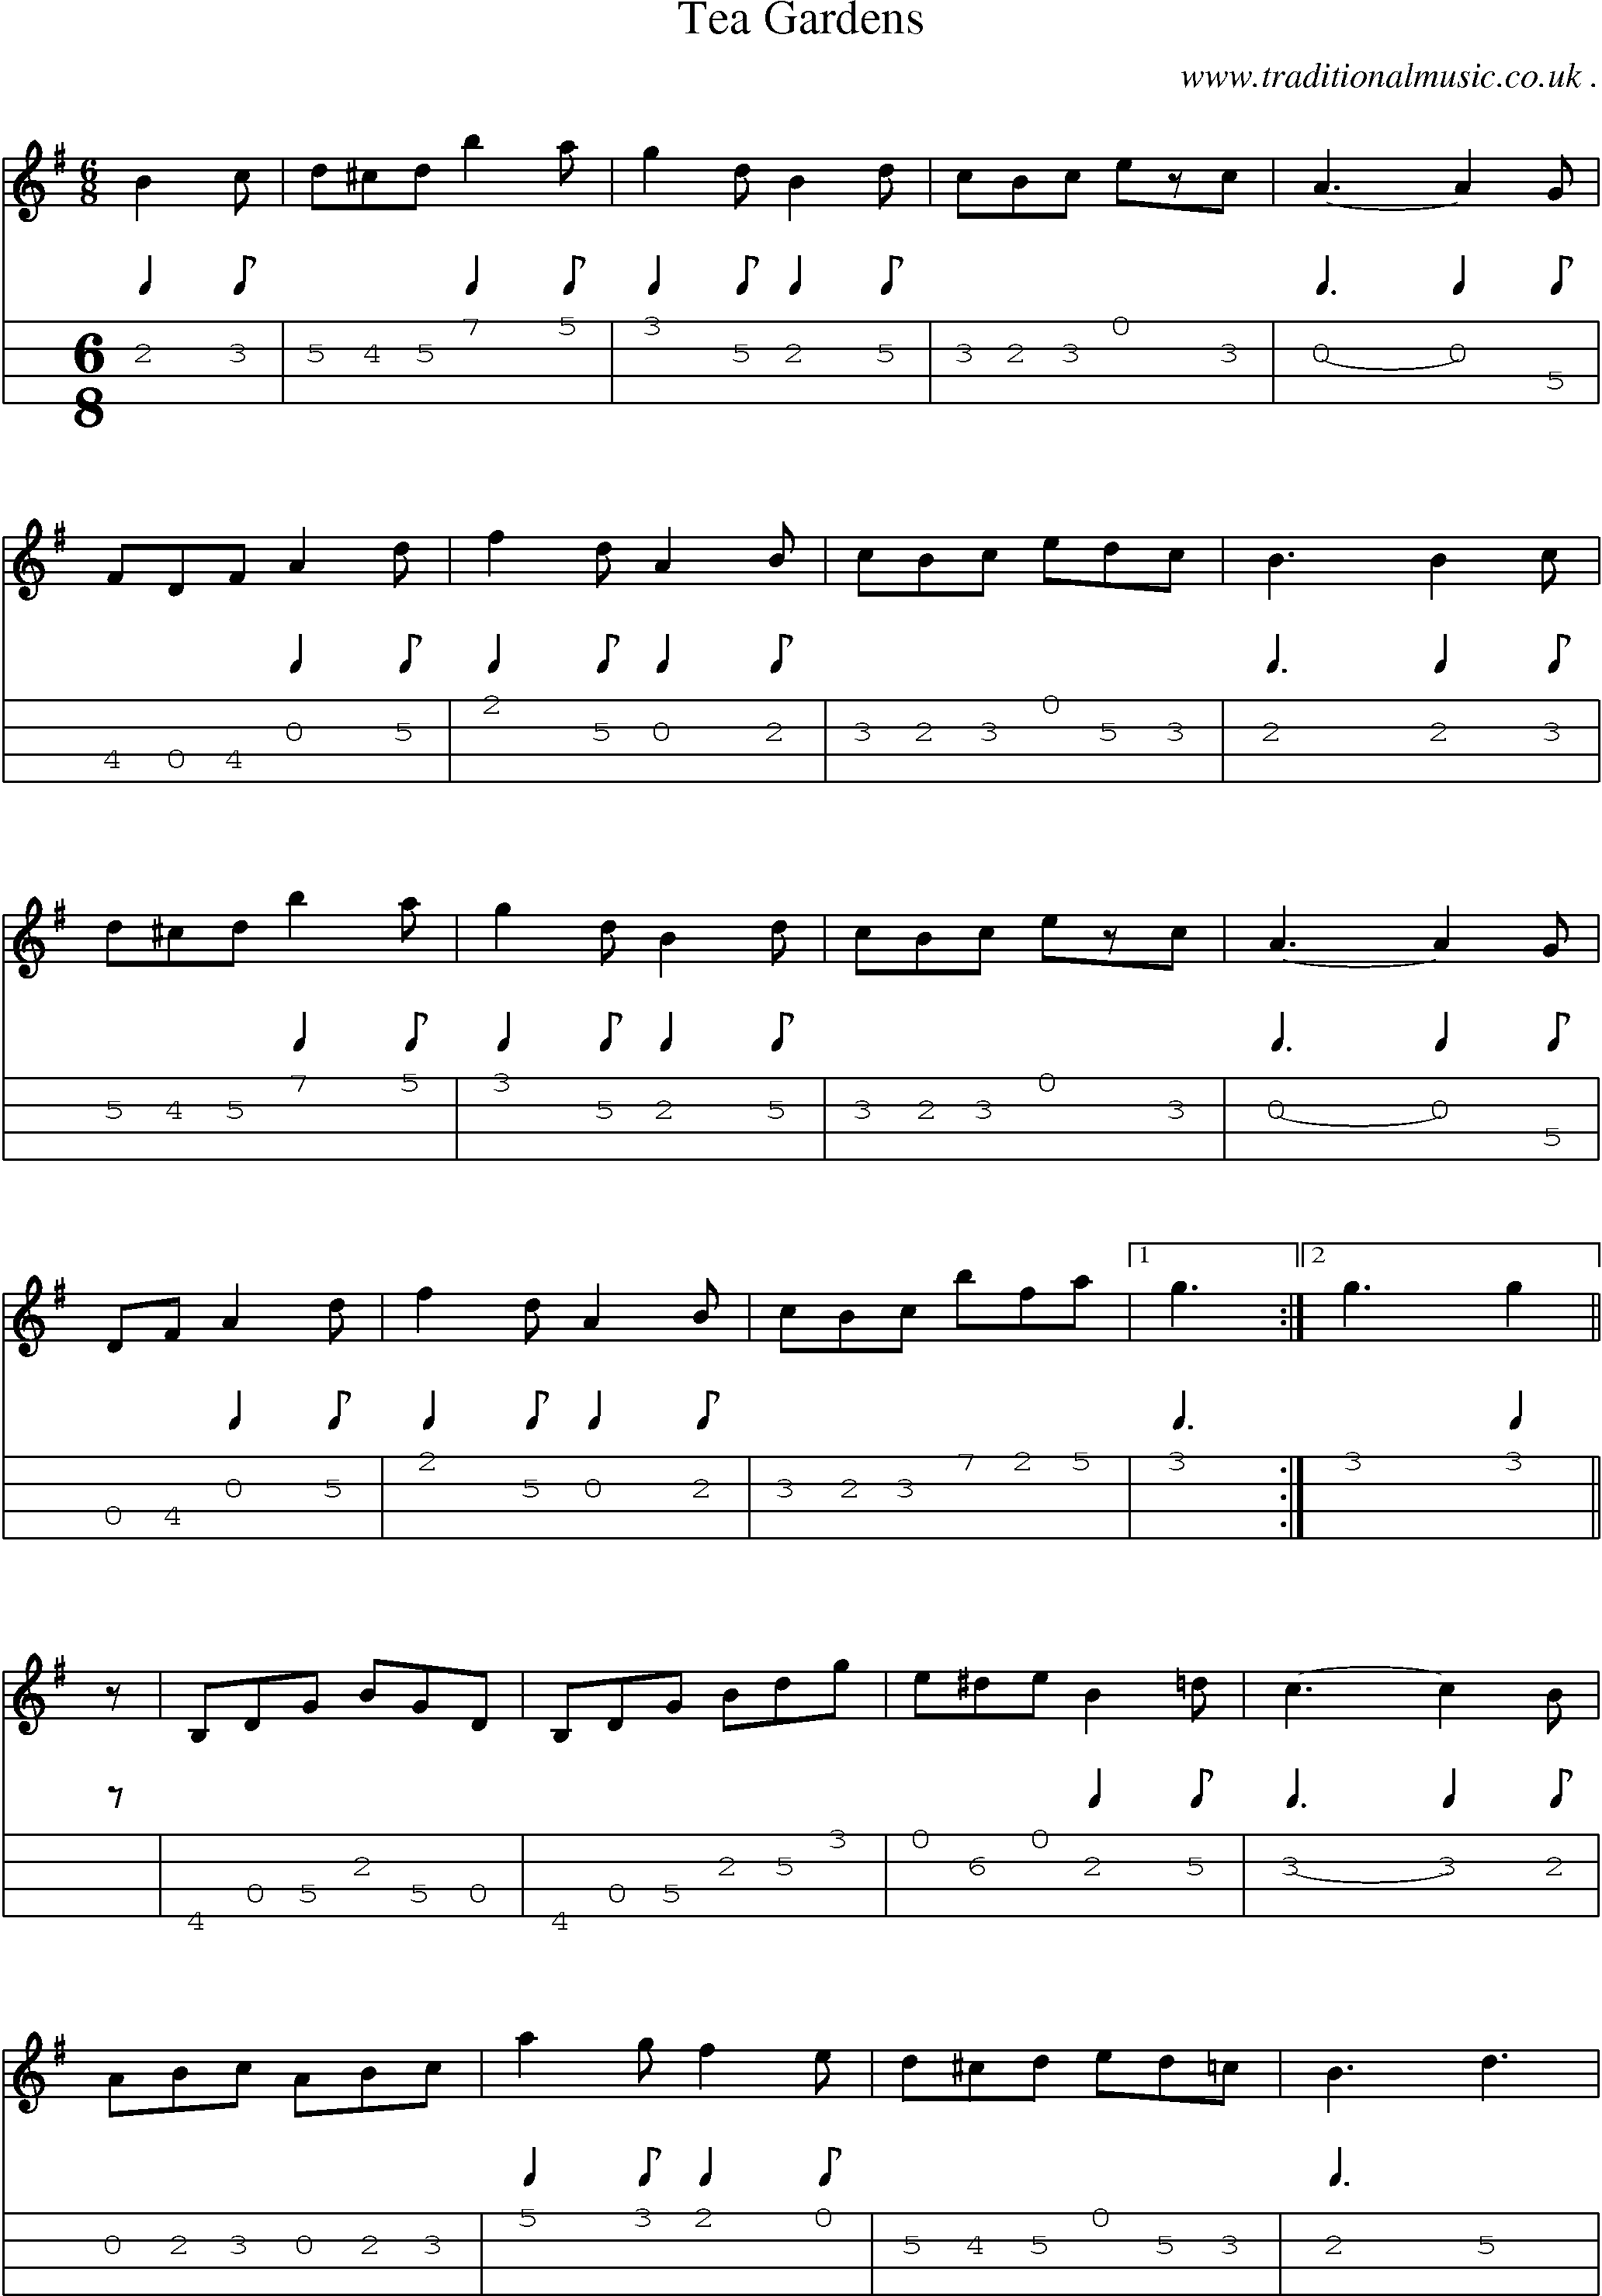 Sheet-music  score, Chords and Mandolin Tabs for Tea Gardens